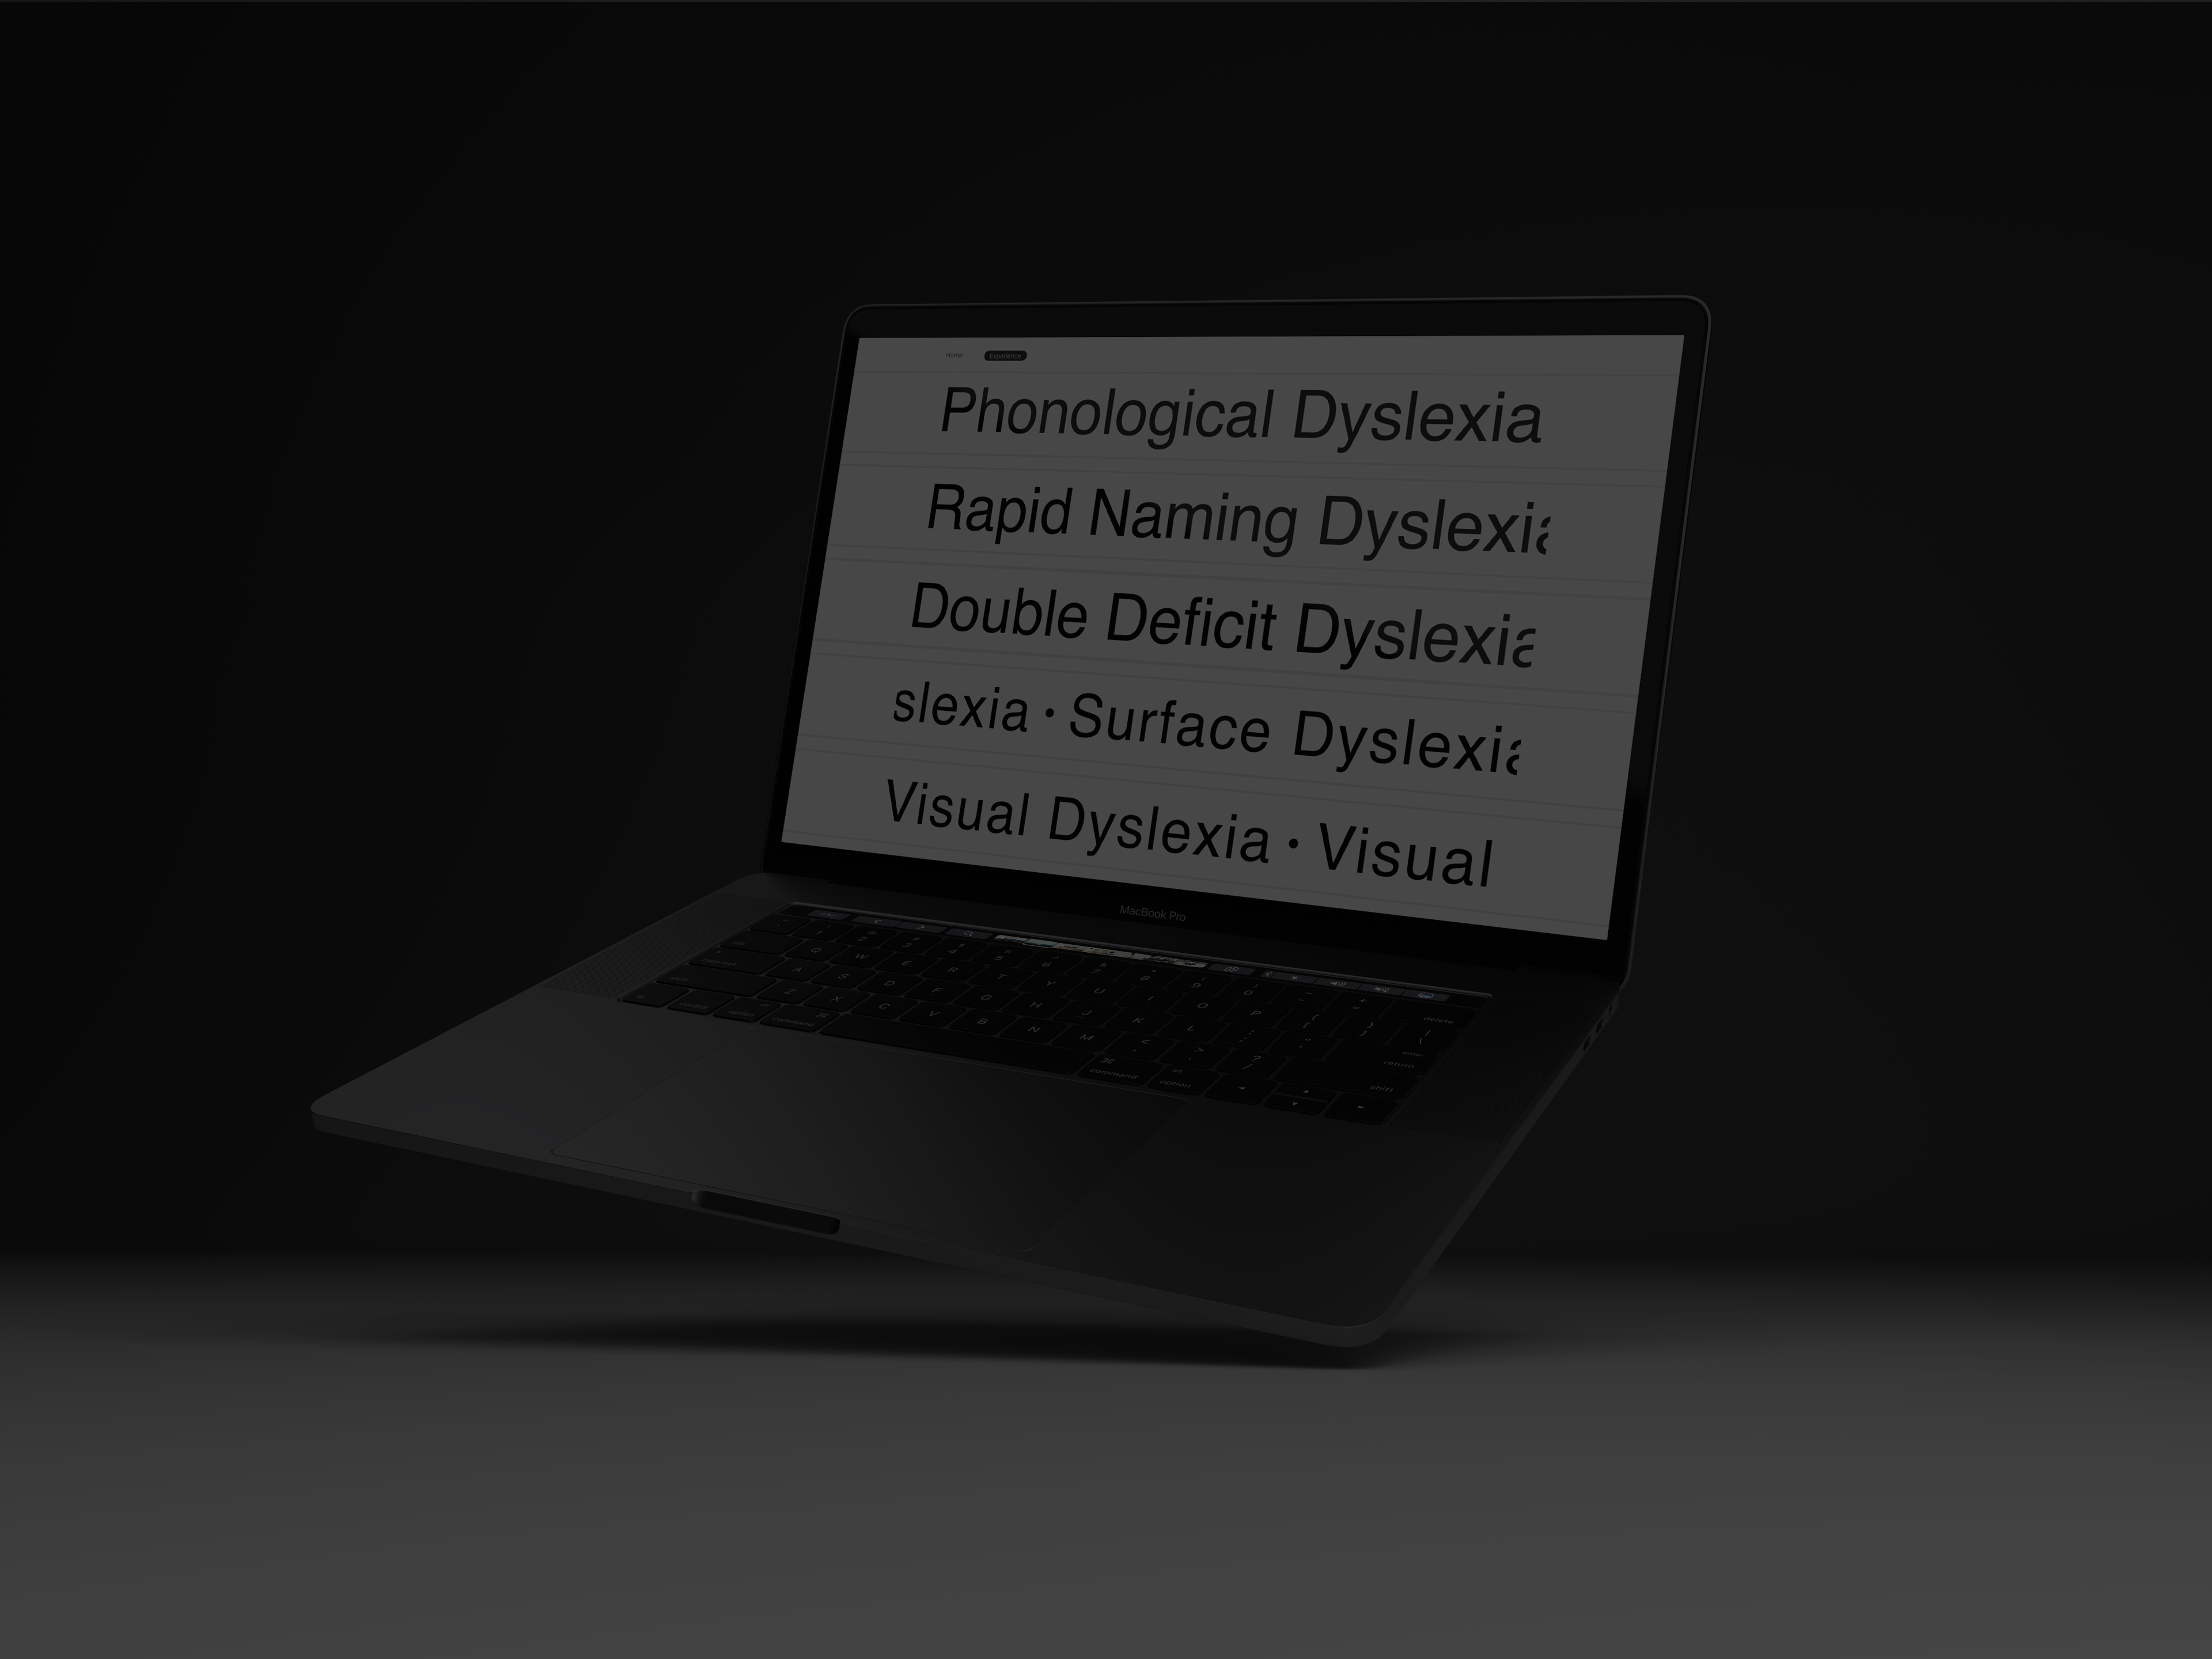 Laptop with screen displaying the different forms of dyslexia